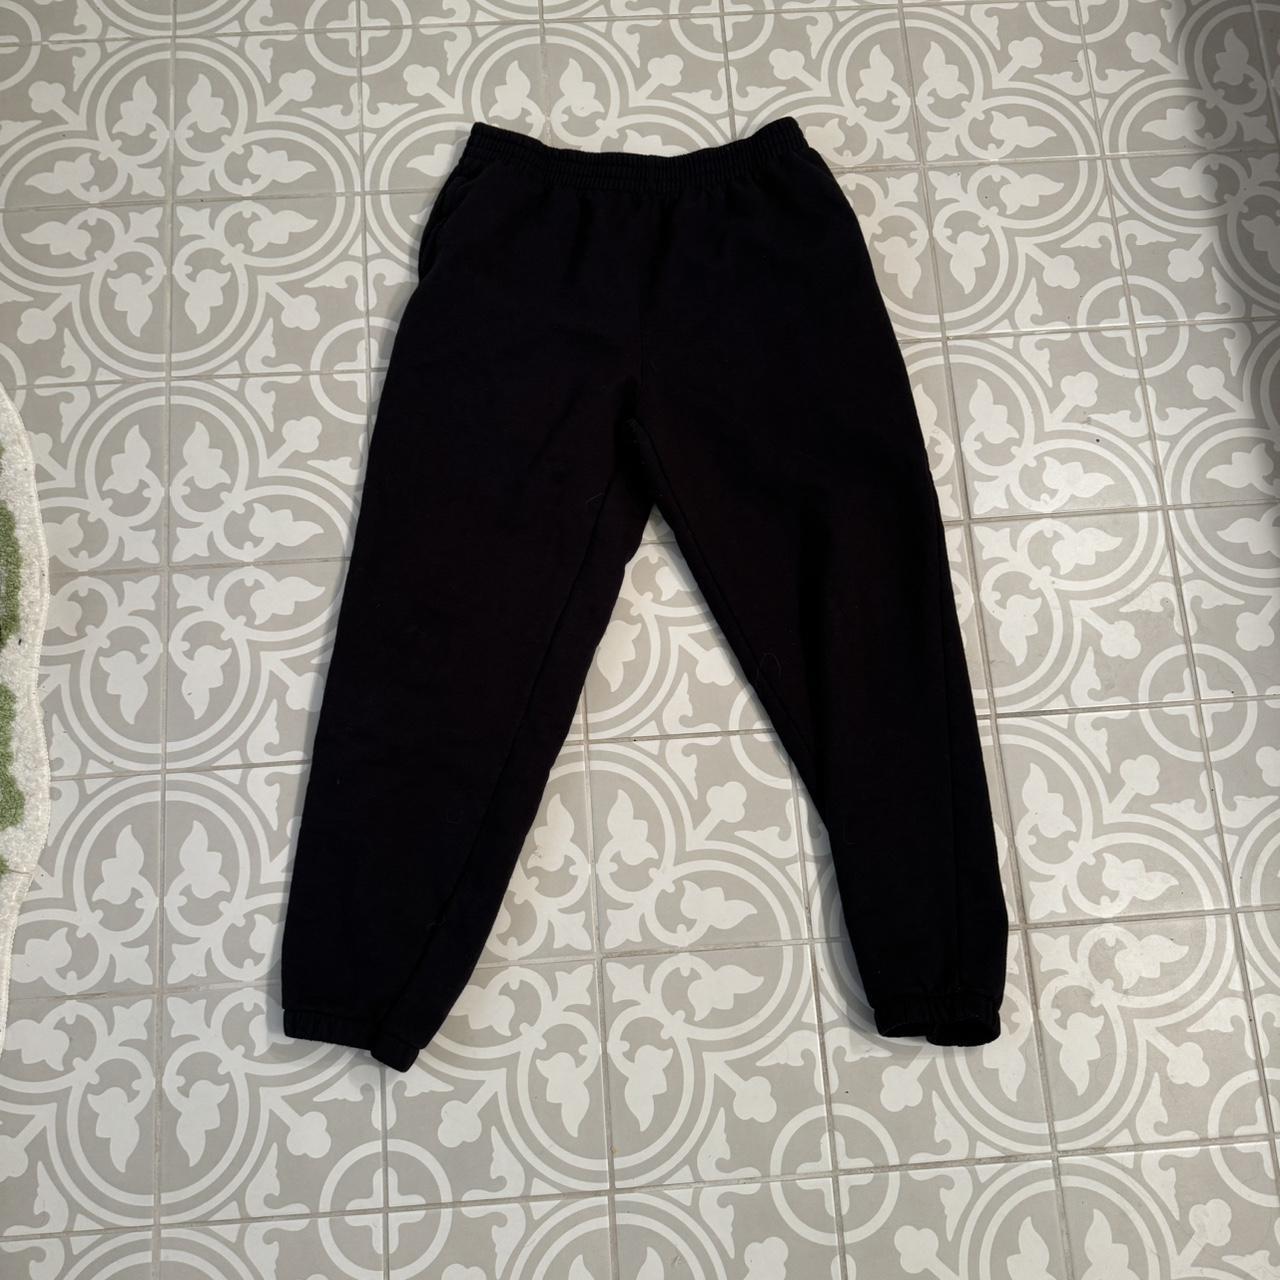 Hanes cropped sweatpants with front pockets & - Depop